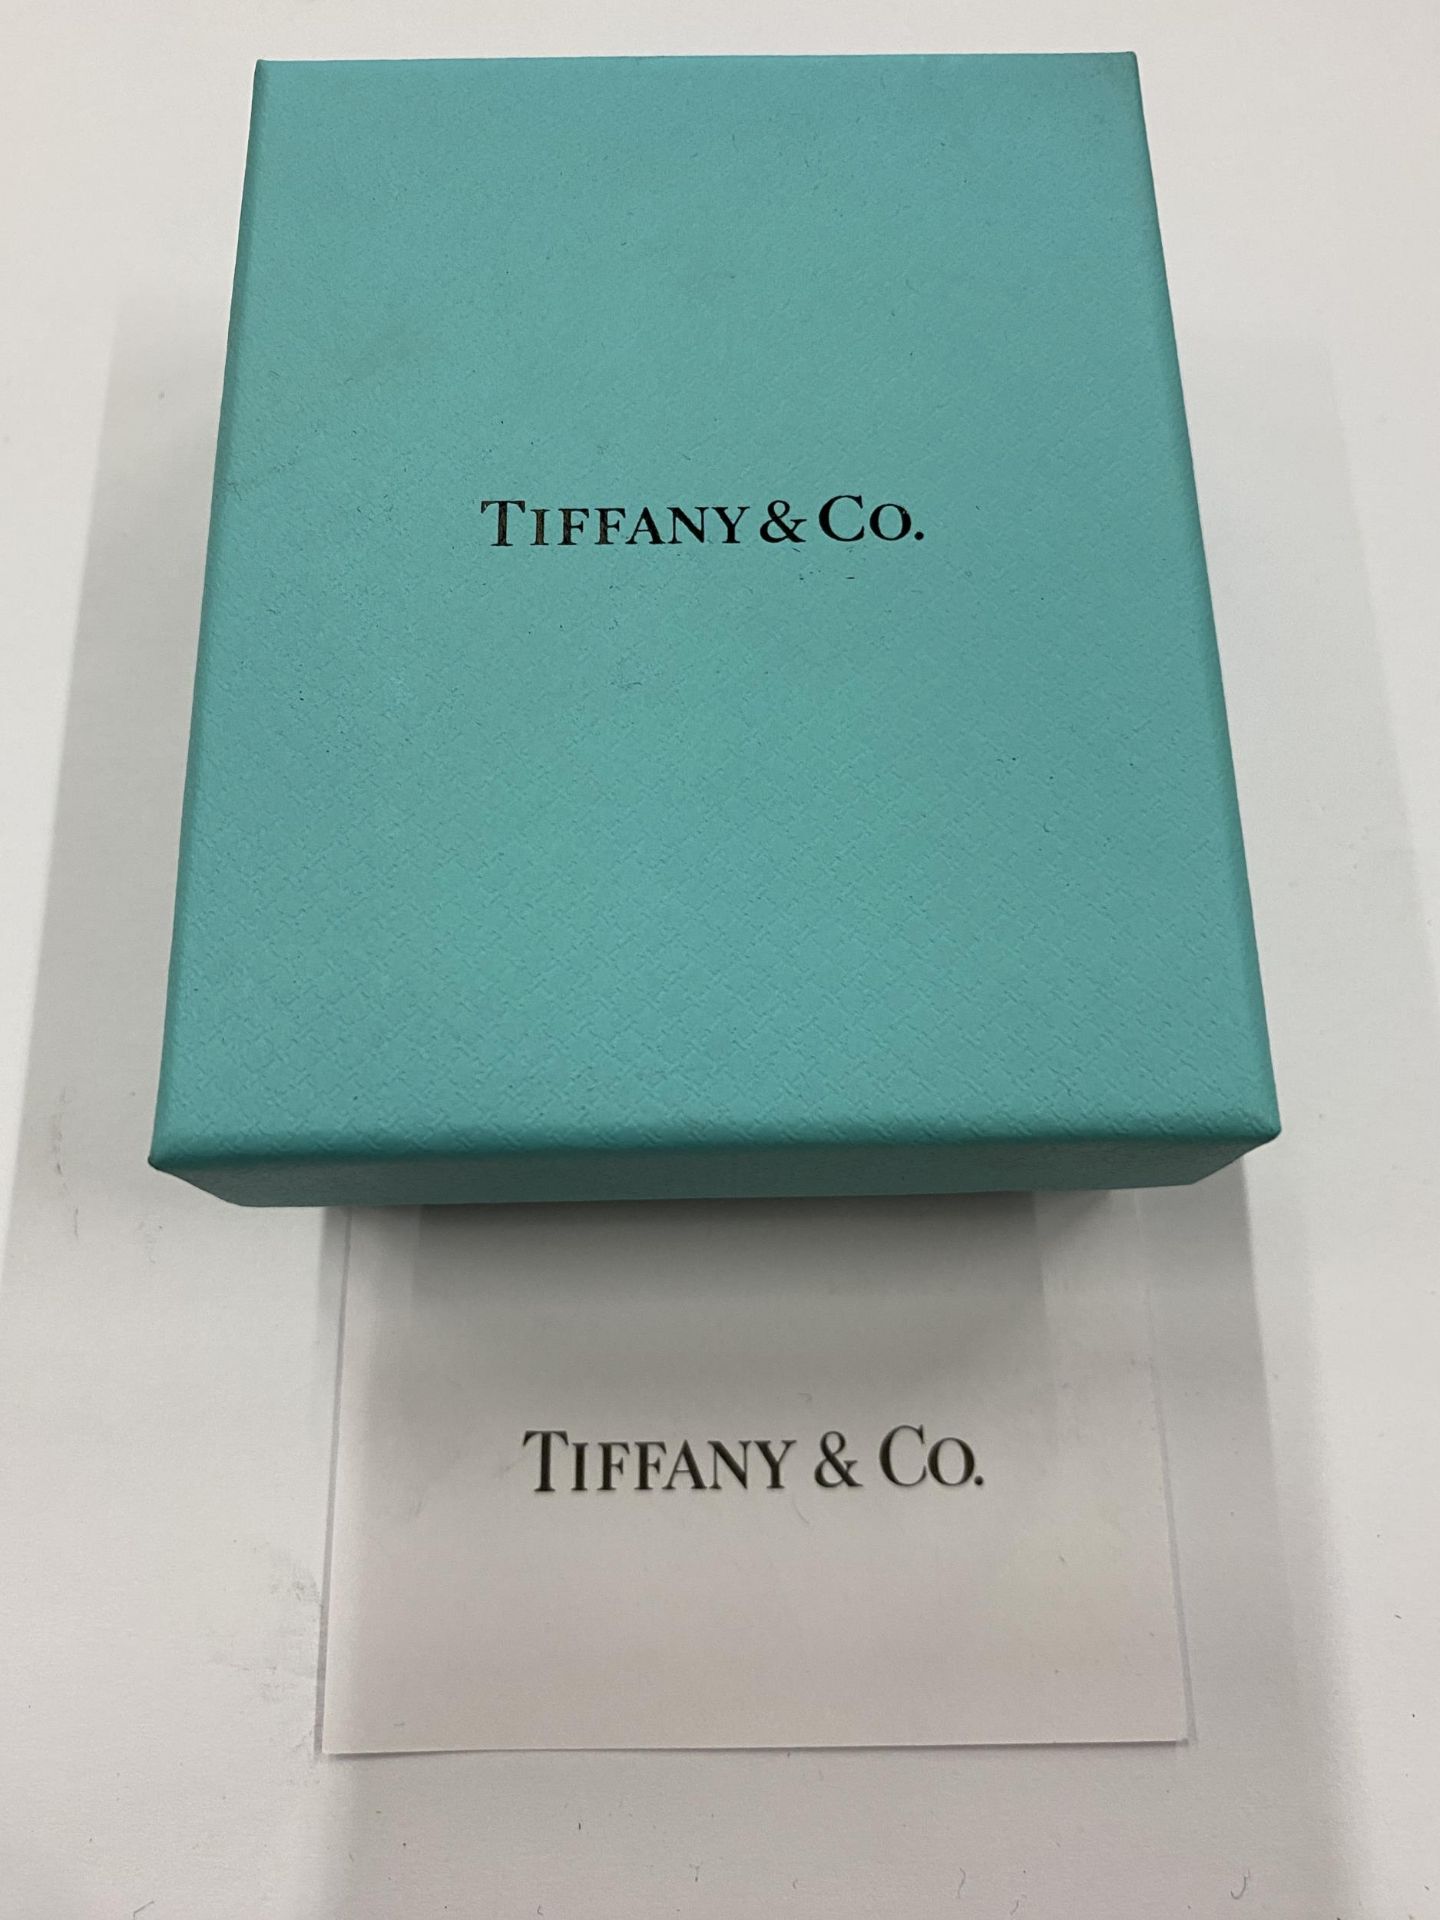 A TIFFANY & CO .925 SILVER HEART PENDANT NECKLACE WITH TIFFANY KEY & ORIGINAL RETAILER'S BOX - Image 8 of 8